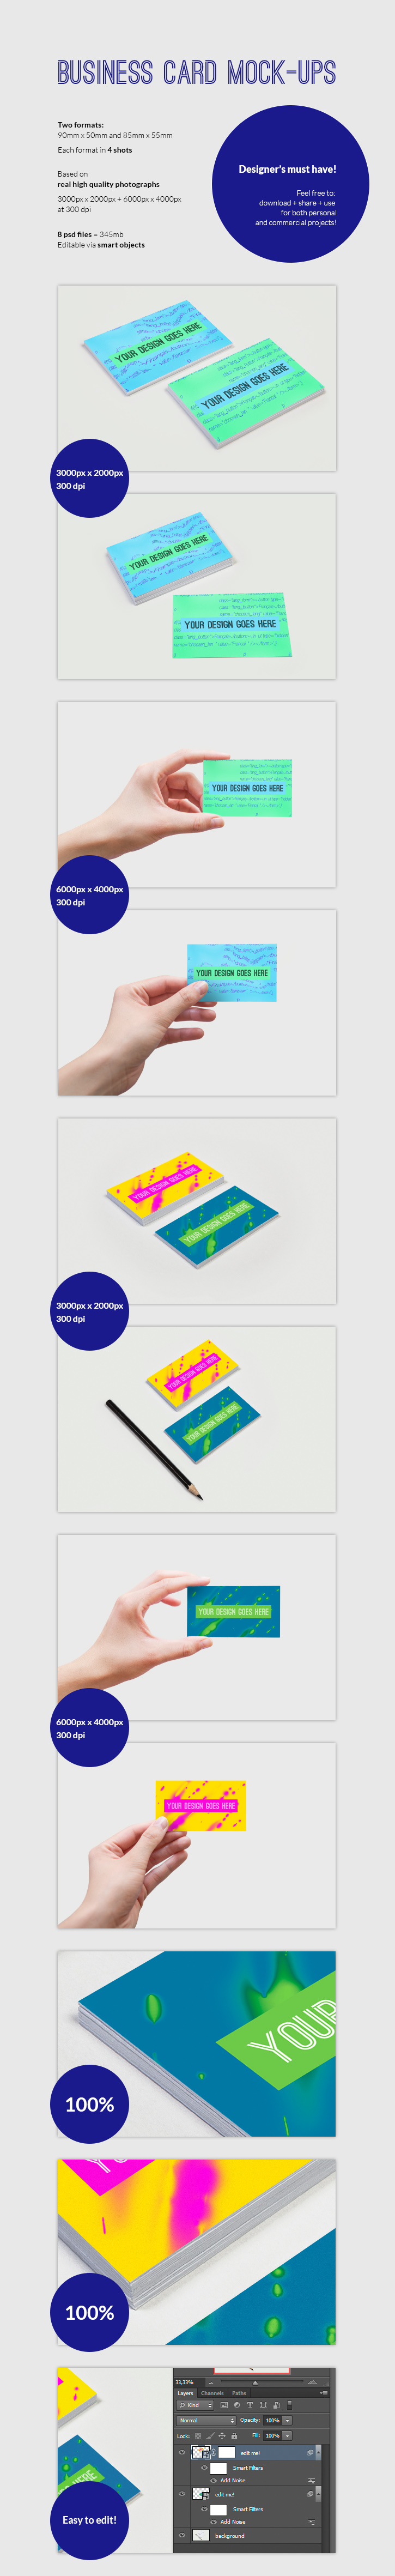 Free Business Card Mock-ups PSD Download